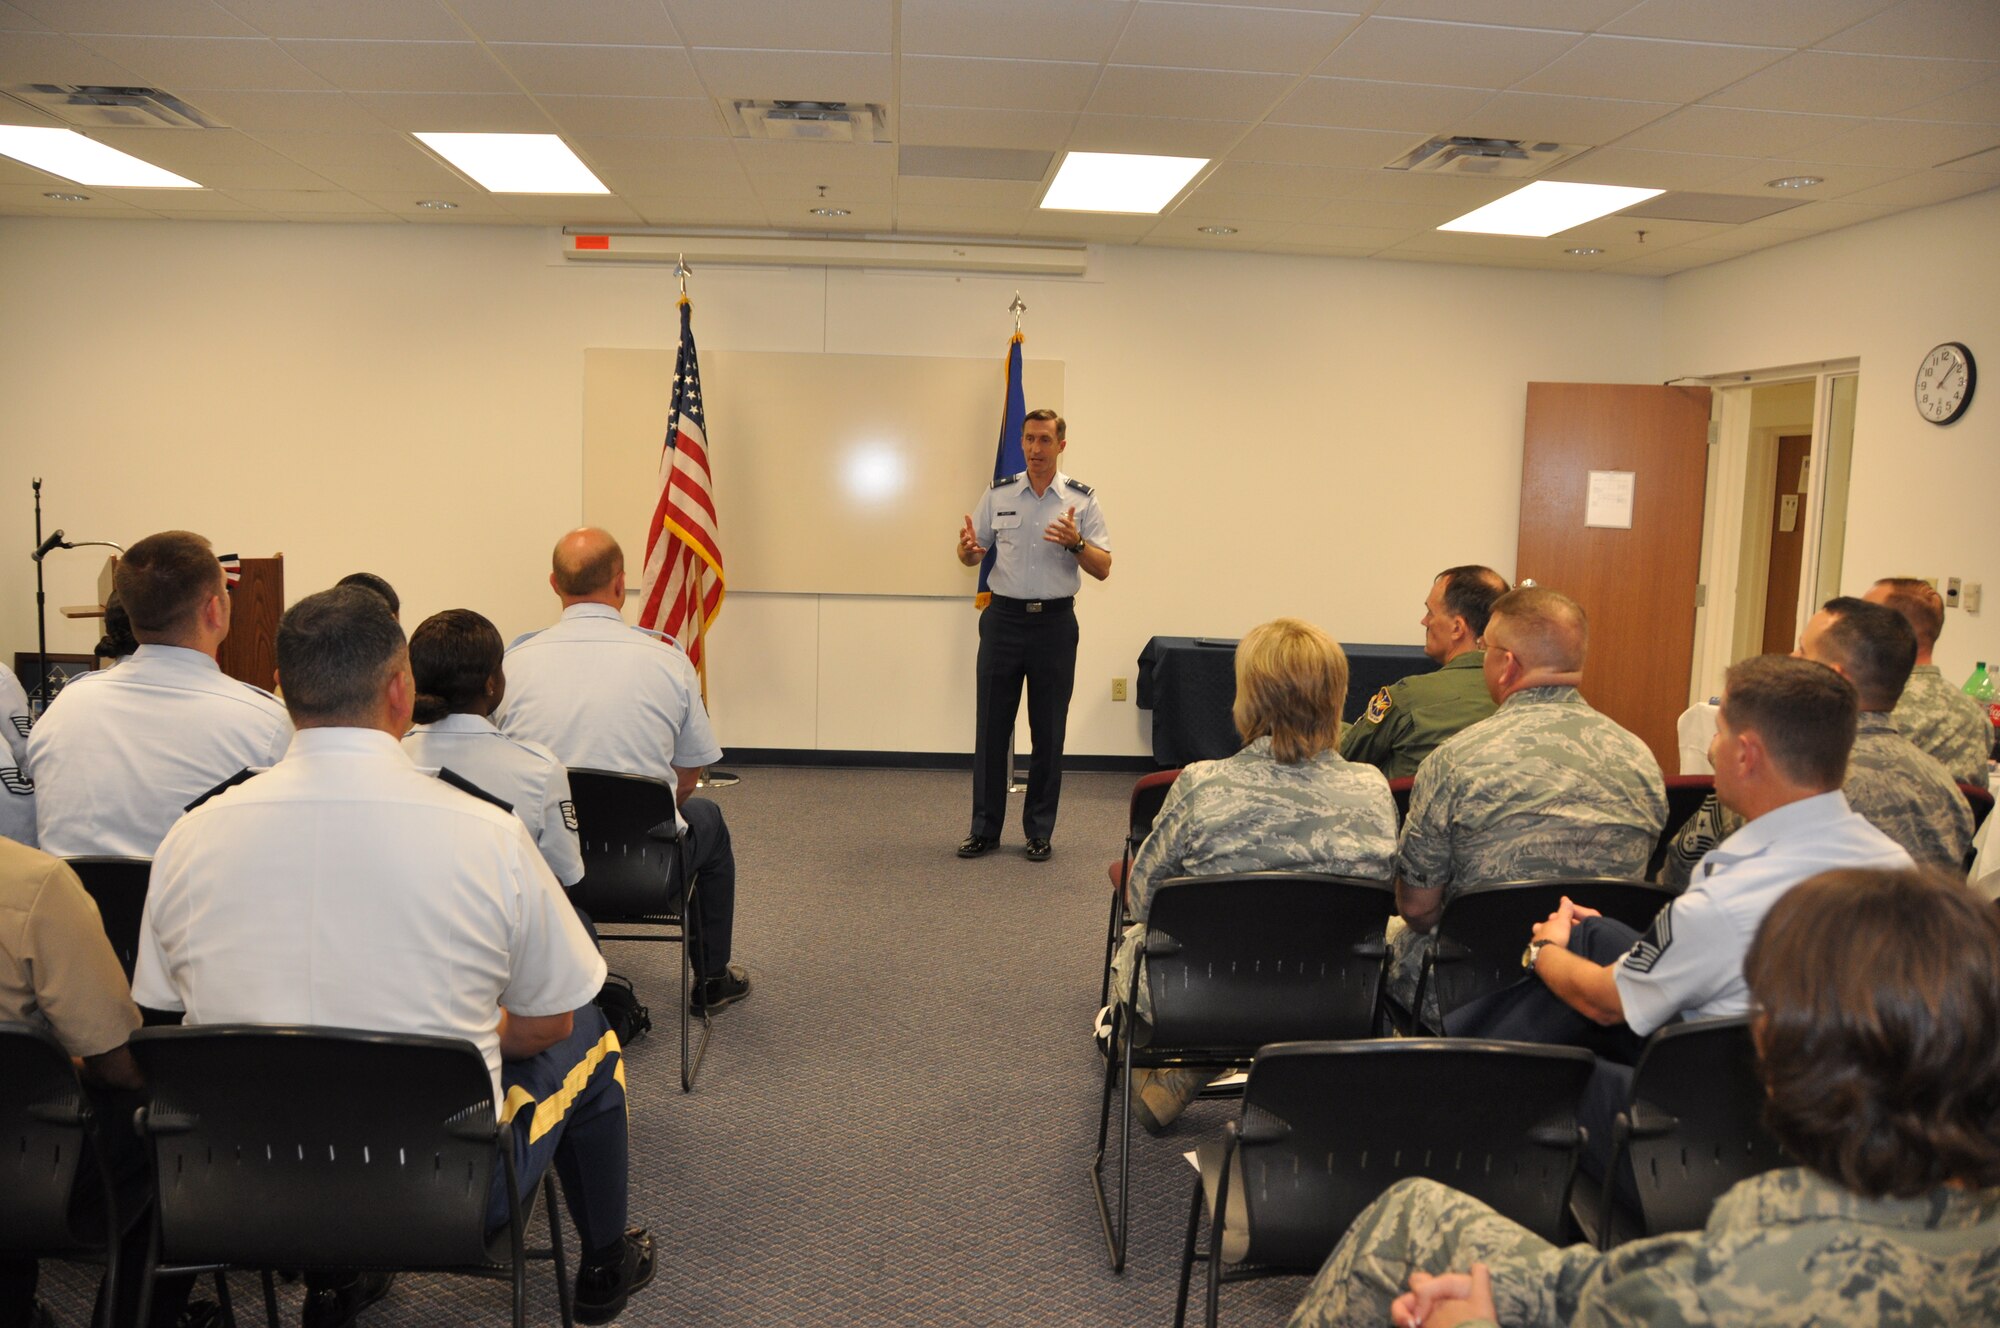 Brig. Gen. Ronald B. Miller, 301st Fighter Wing commander, speaks during a joint noncommissioned officer leadership development course graduation Friday, May 4. There were 22 total service members from the Air Force, Army, and Navy who participated. This was the first joint class to be held at the wing and the largest multi-branch class to be held in the Air Force Reserve Command. (U.S. Air Force photo/SrA Melissa Harvey)